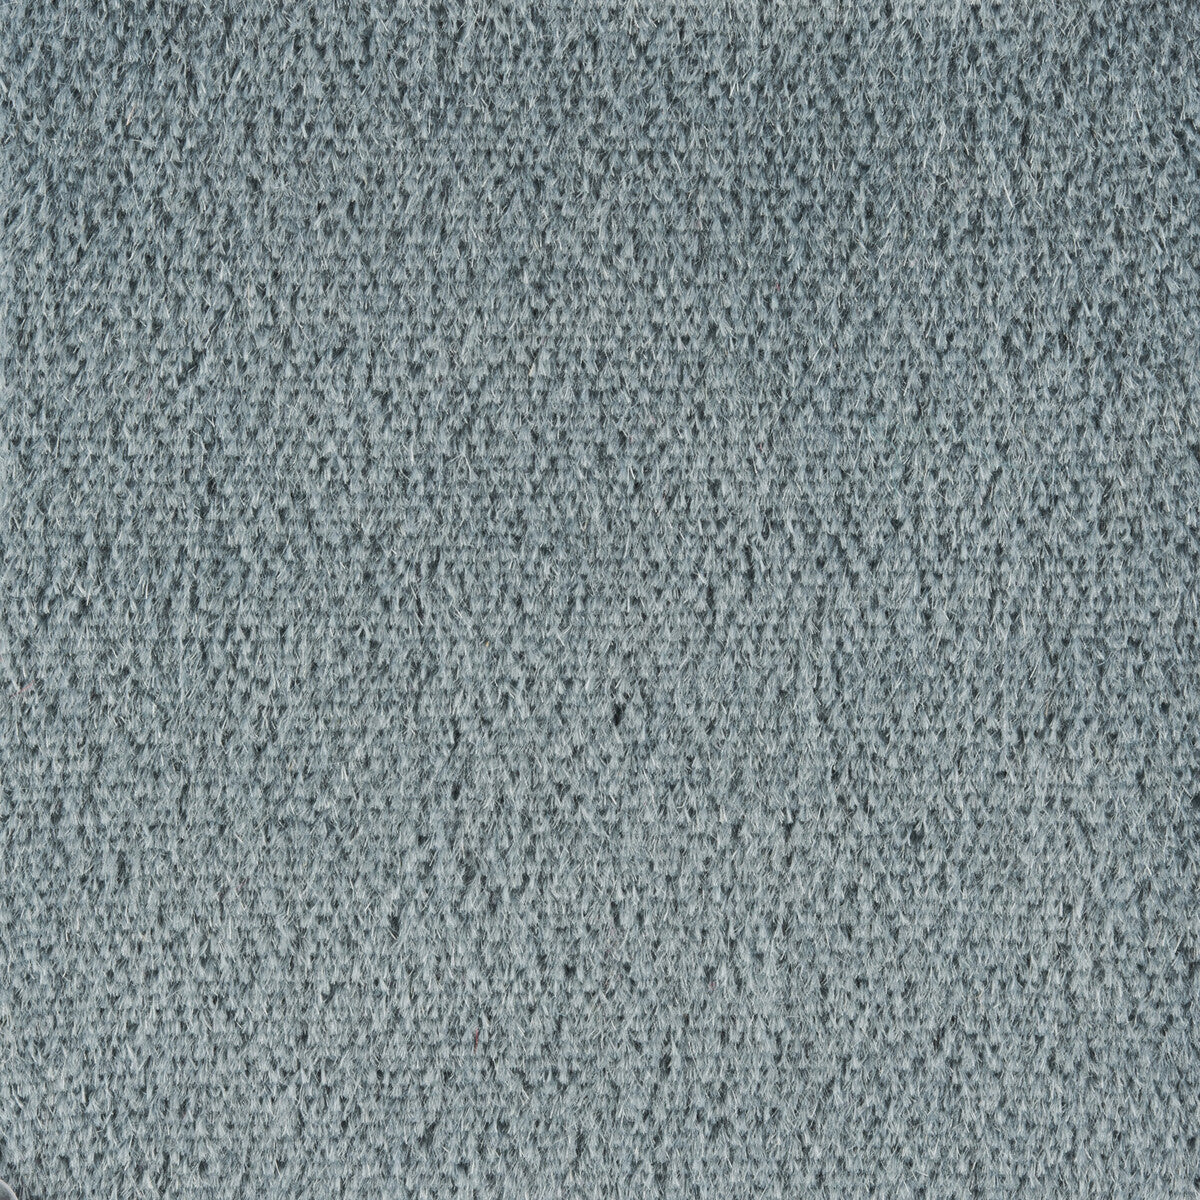 Plazzo Mohair fabric in sea color - pattern 34259.280.0 - by Kravet Couture